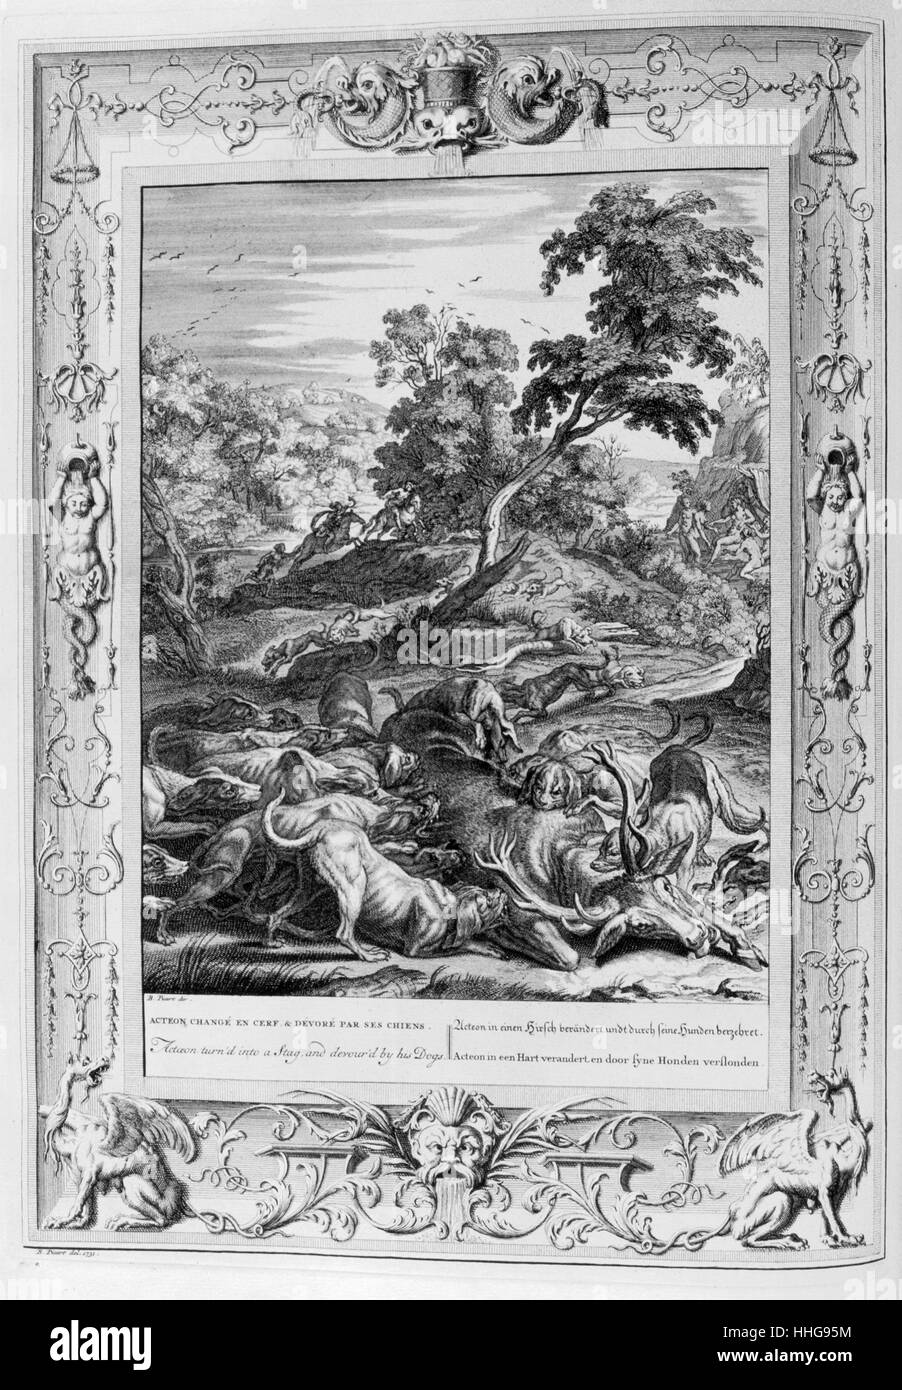 Acteon devoured by hunting hounds. Engraved illustration from 'The Temple of the Muses', 1733. Stock Photo